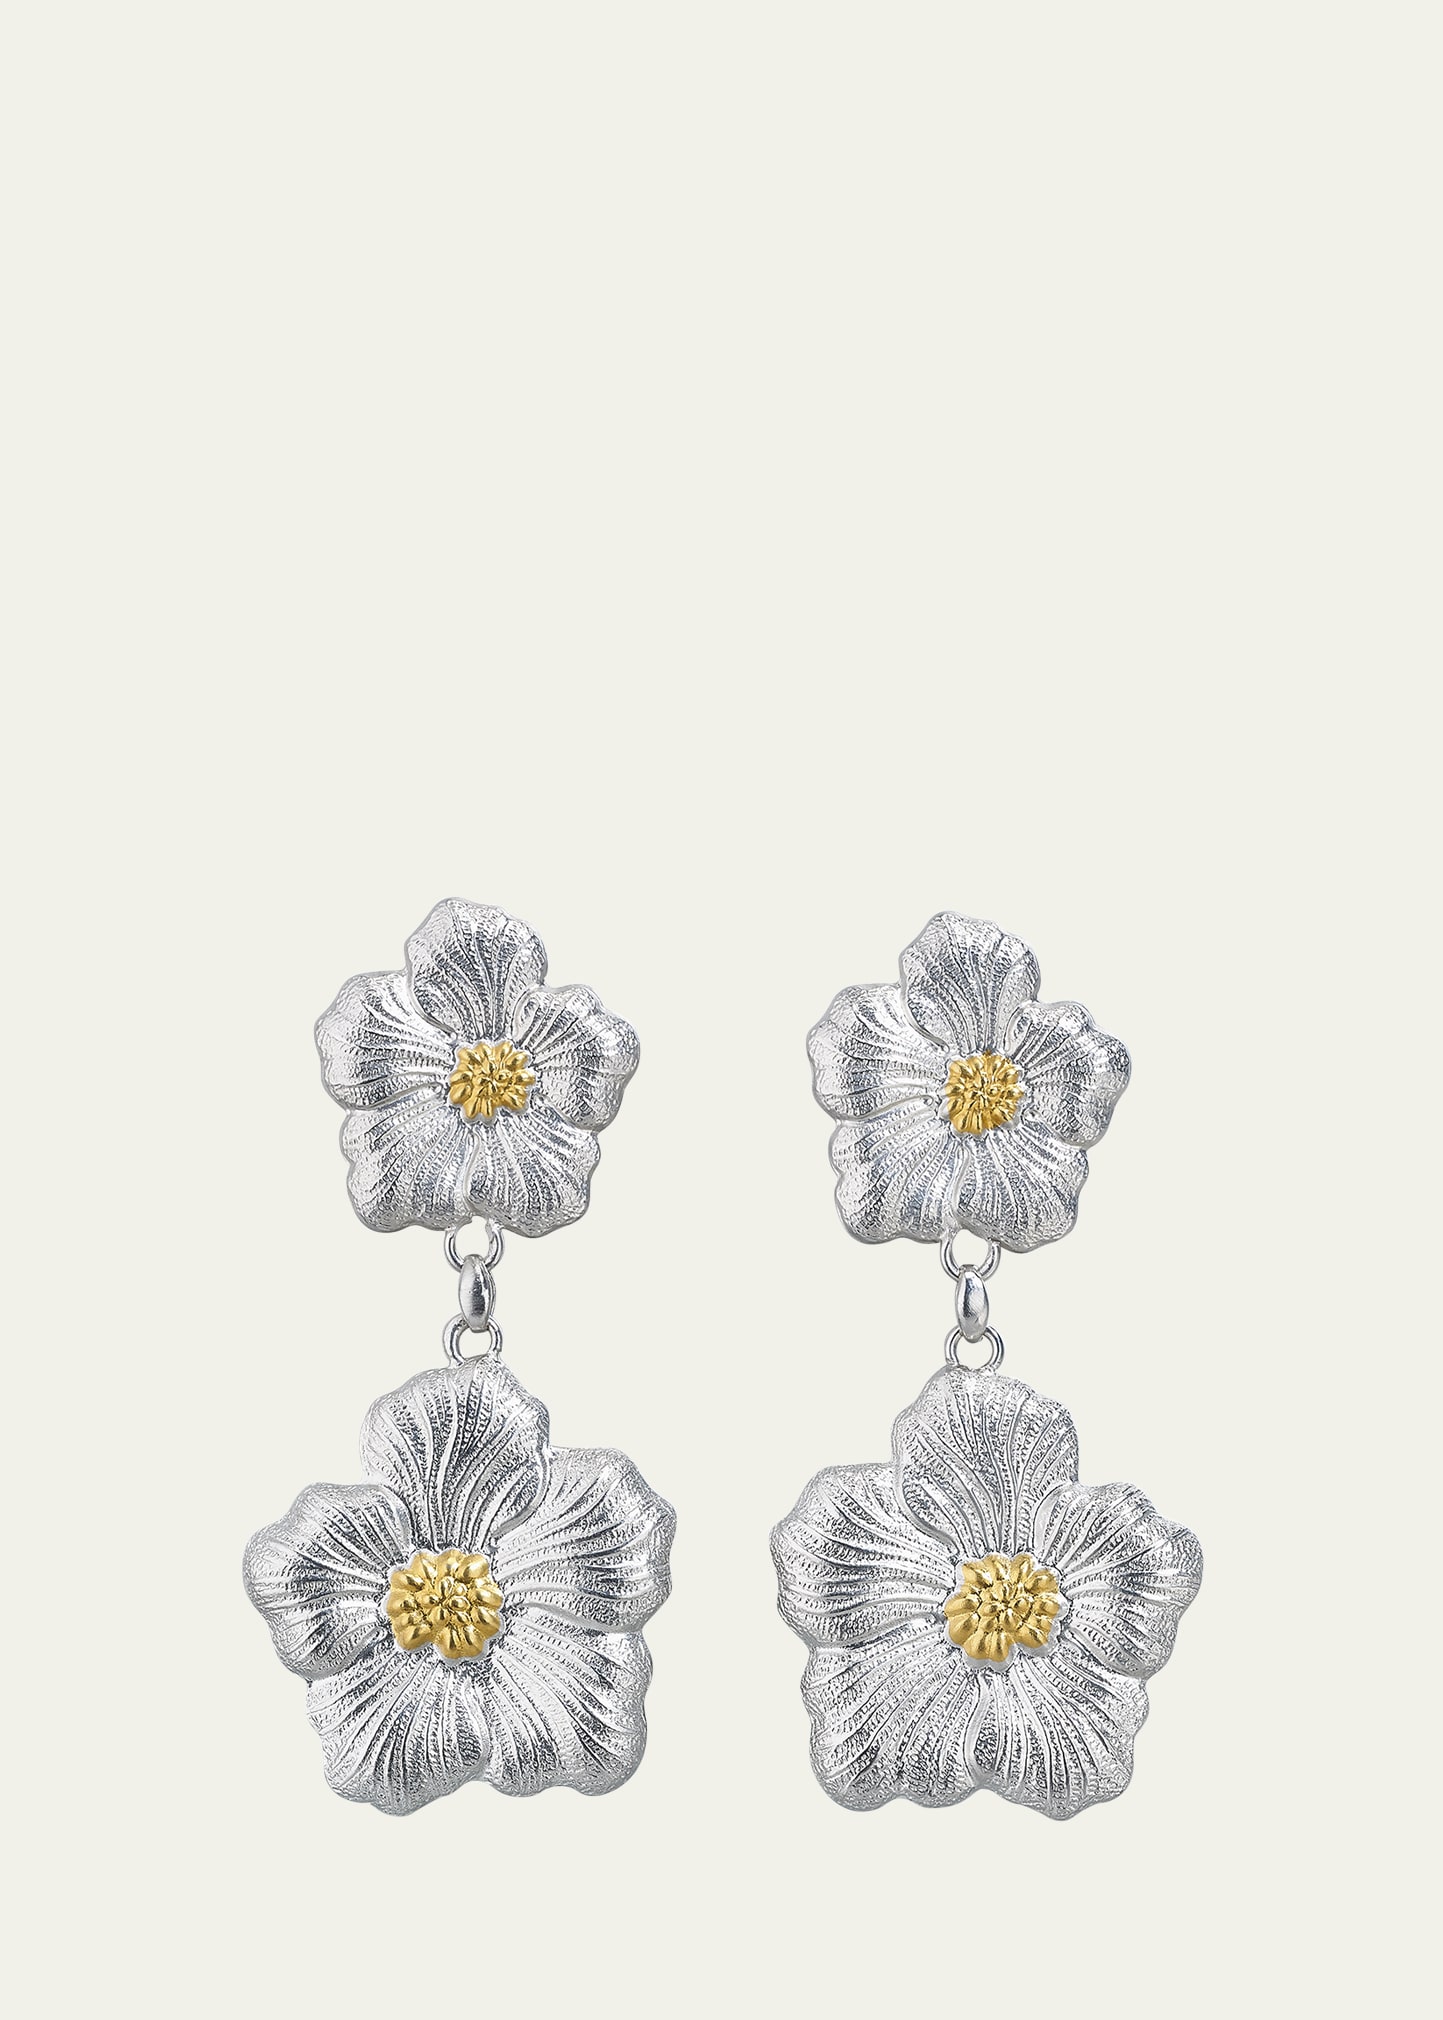 Blossoms Gardenia Sterling Silver and 18K Yellow Gold Pendant Earrings, 8.5cm